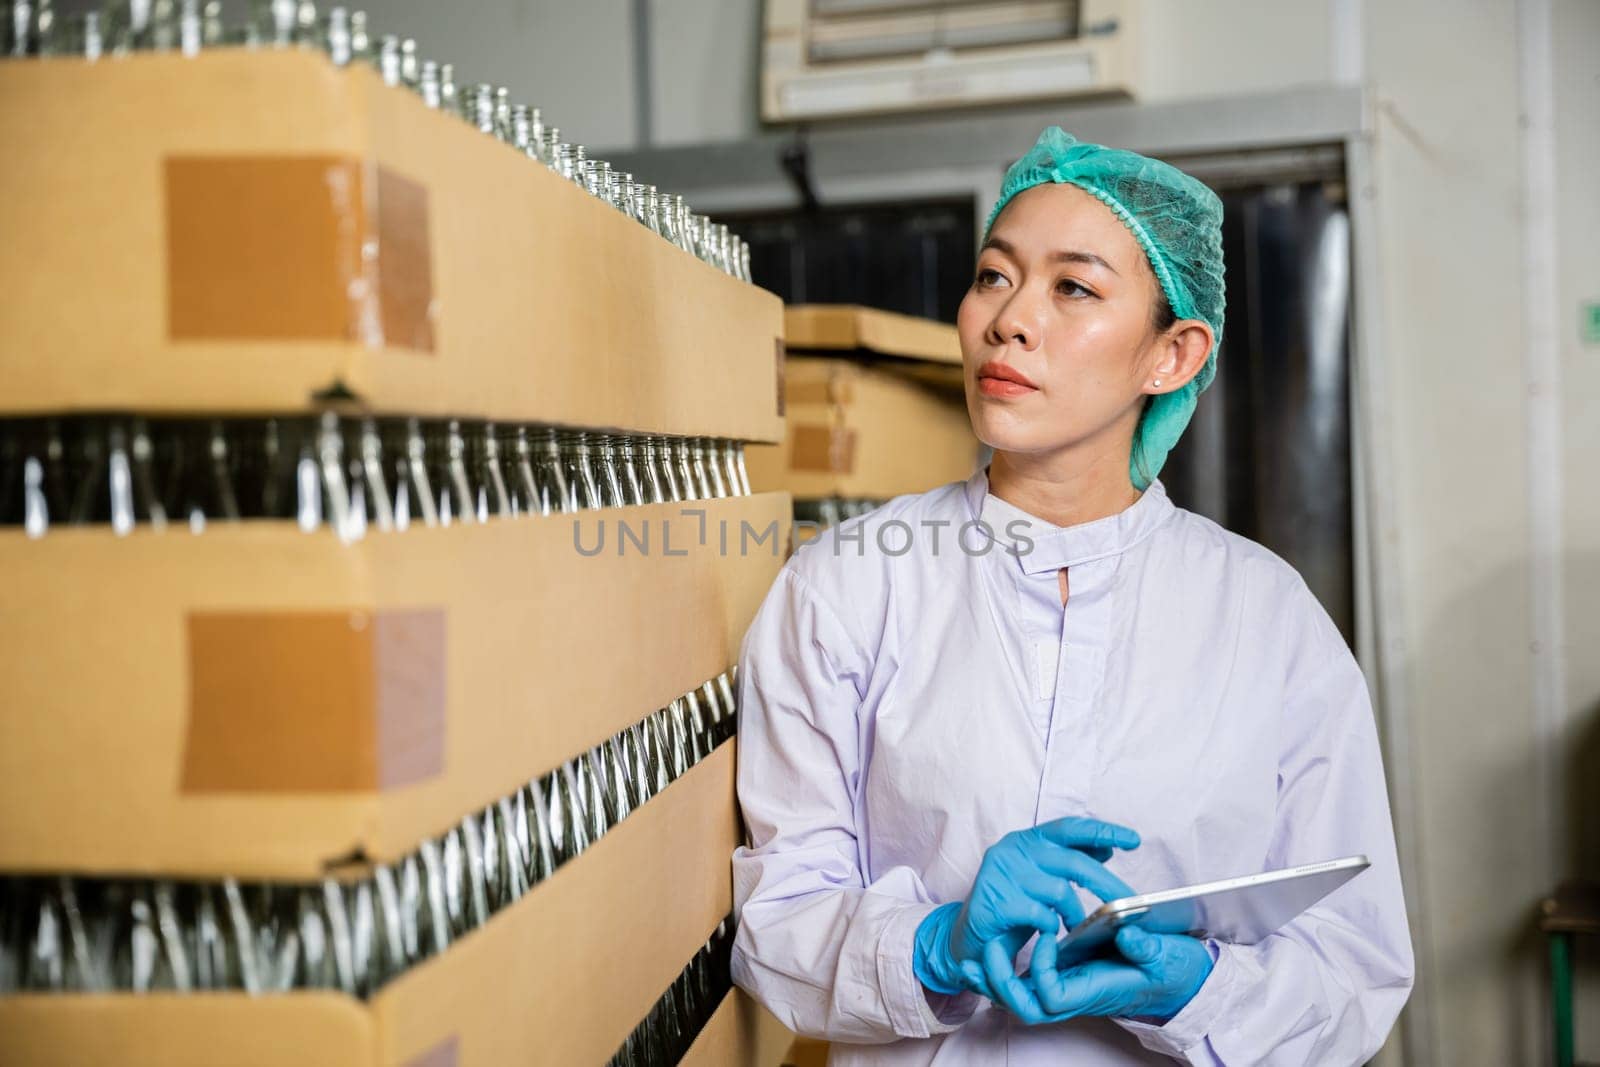 Within a beverage factory a QC woman checks products on the conveyor belt using a digital tablet. Her role involves quality control while examining the bottling line for liquid manufacturing.